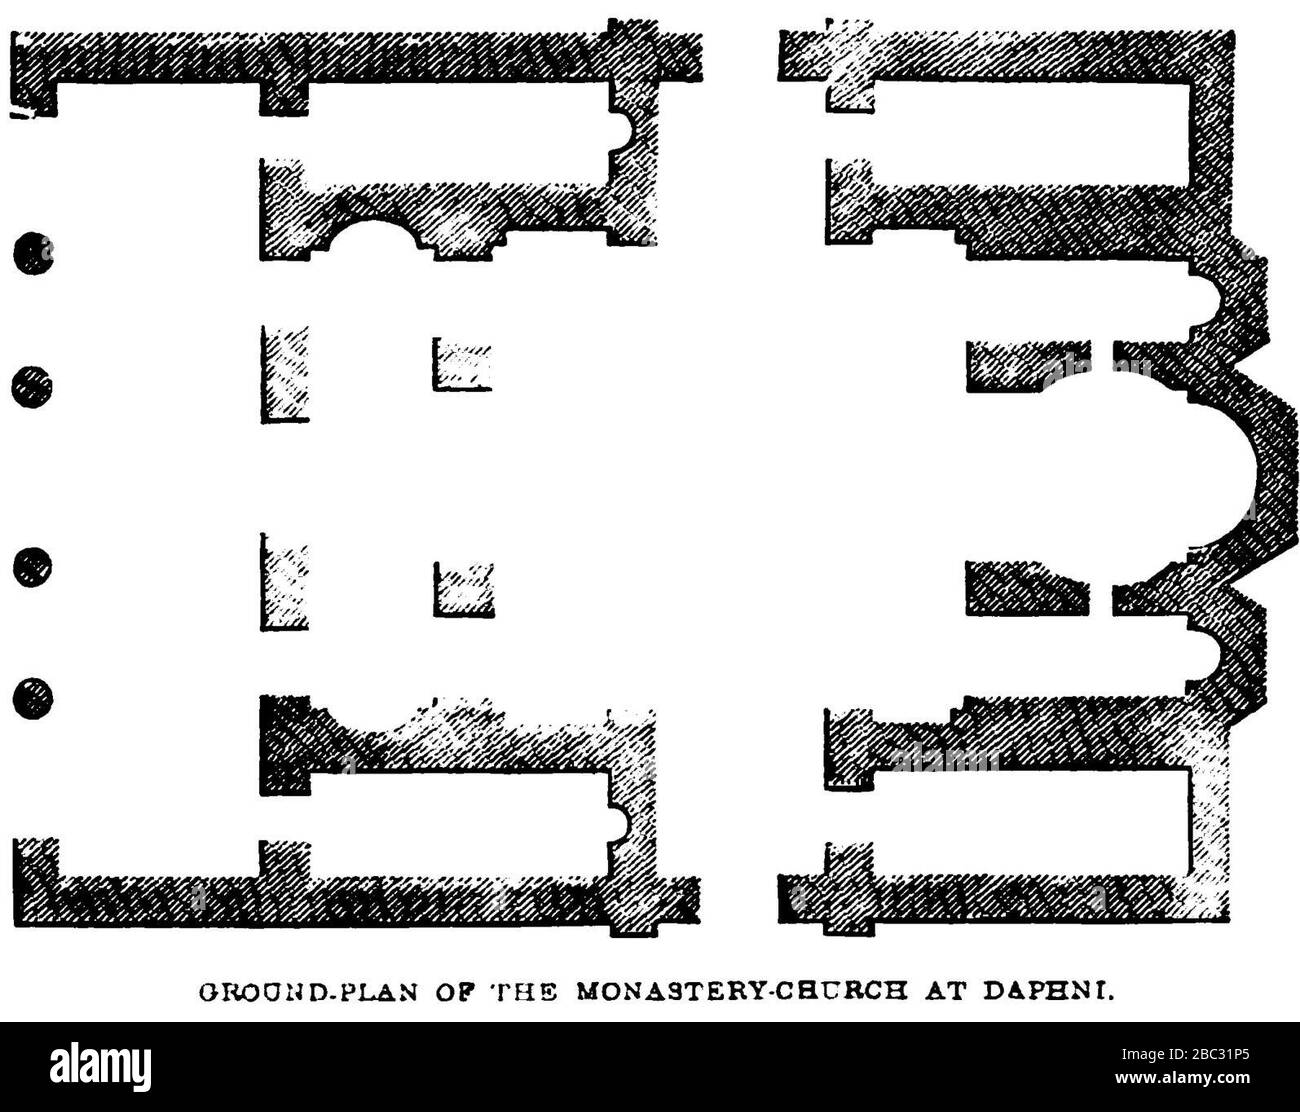 Ground.Plan of the Monastery-Church at Daphni. John M. Neale. A history of the Holy Eastern Church. P.183. Stock Photo